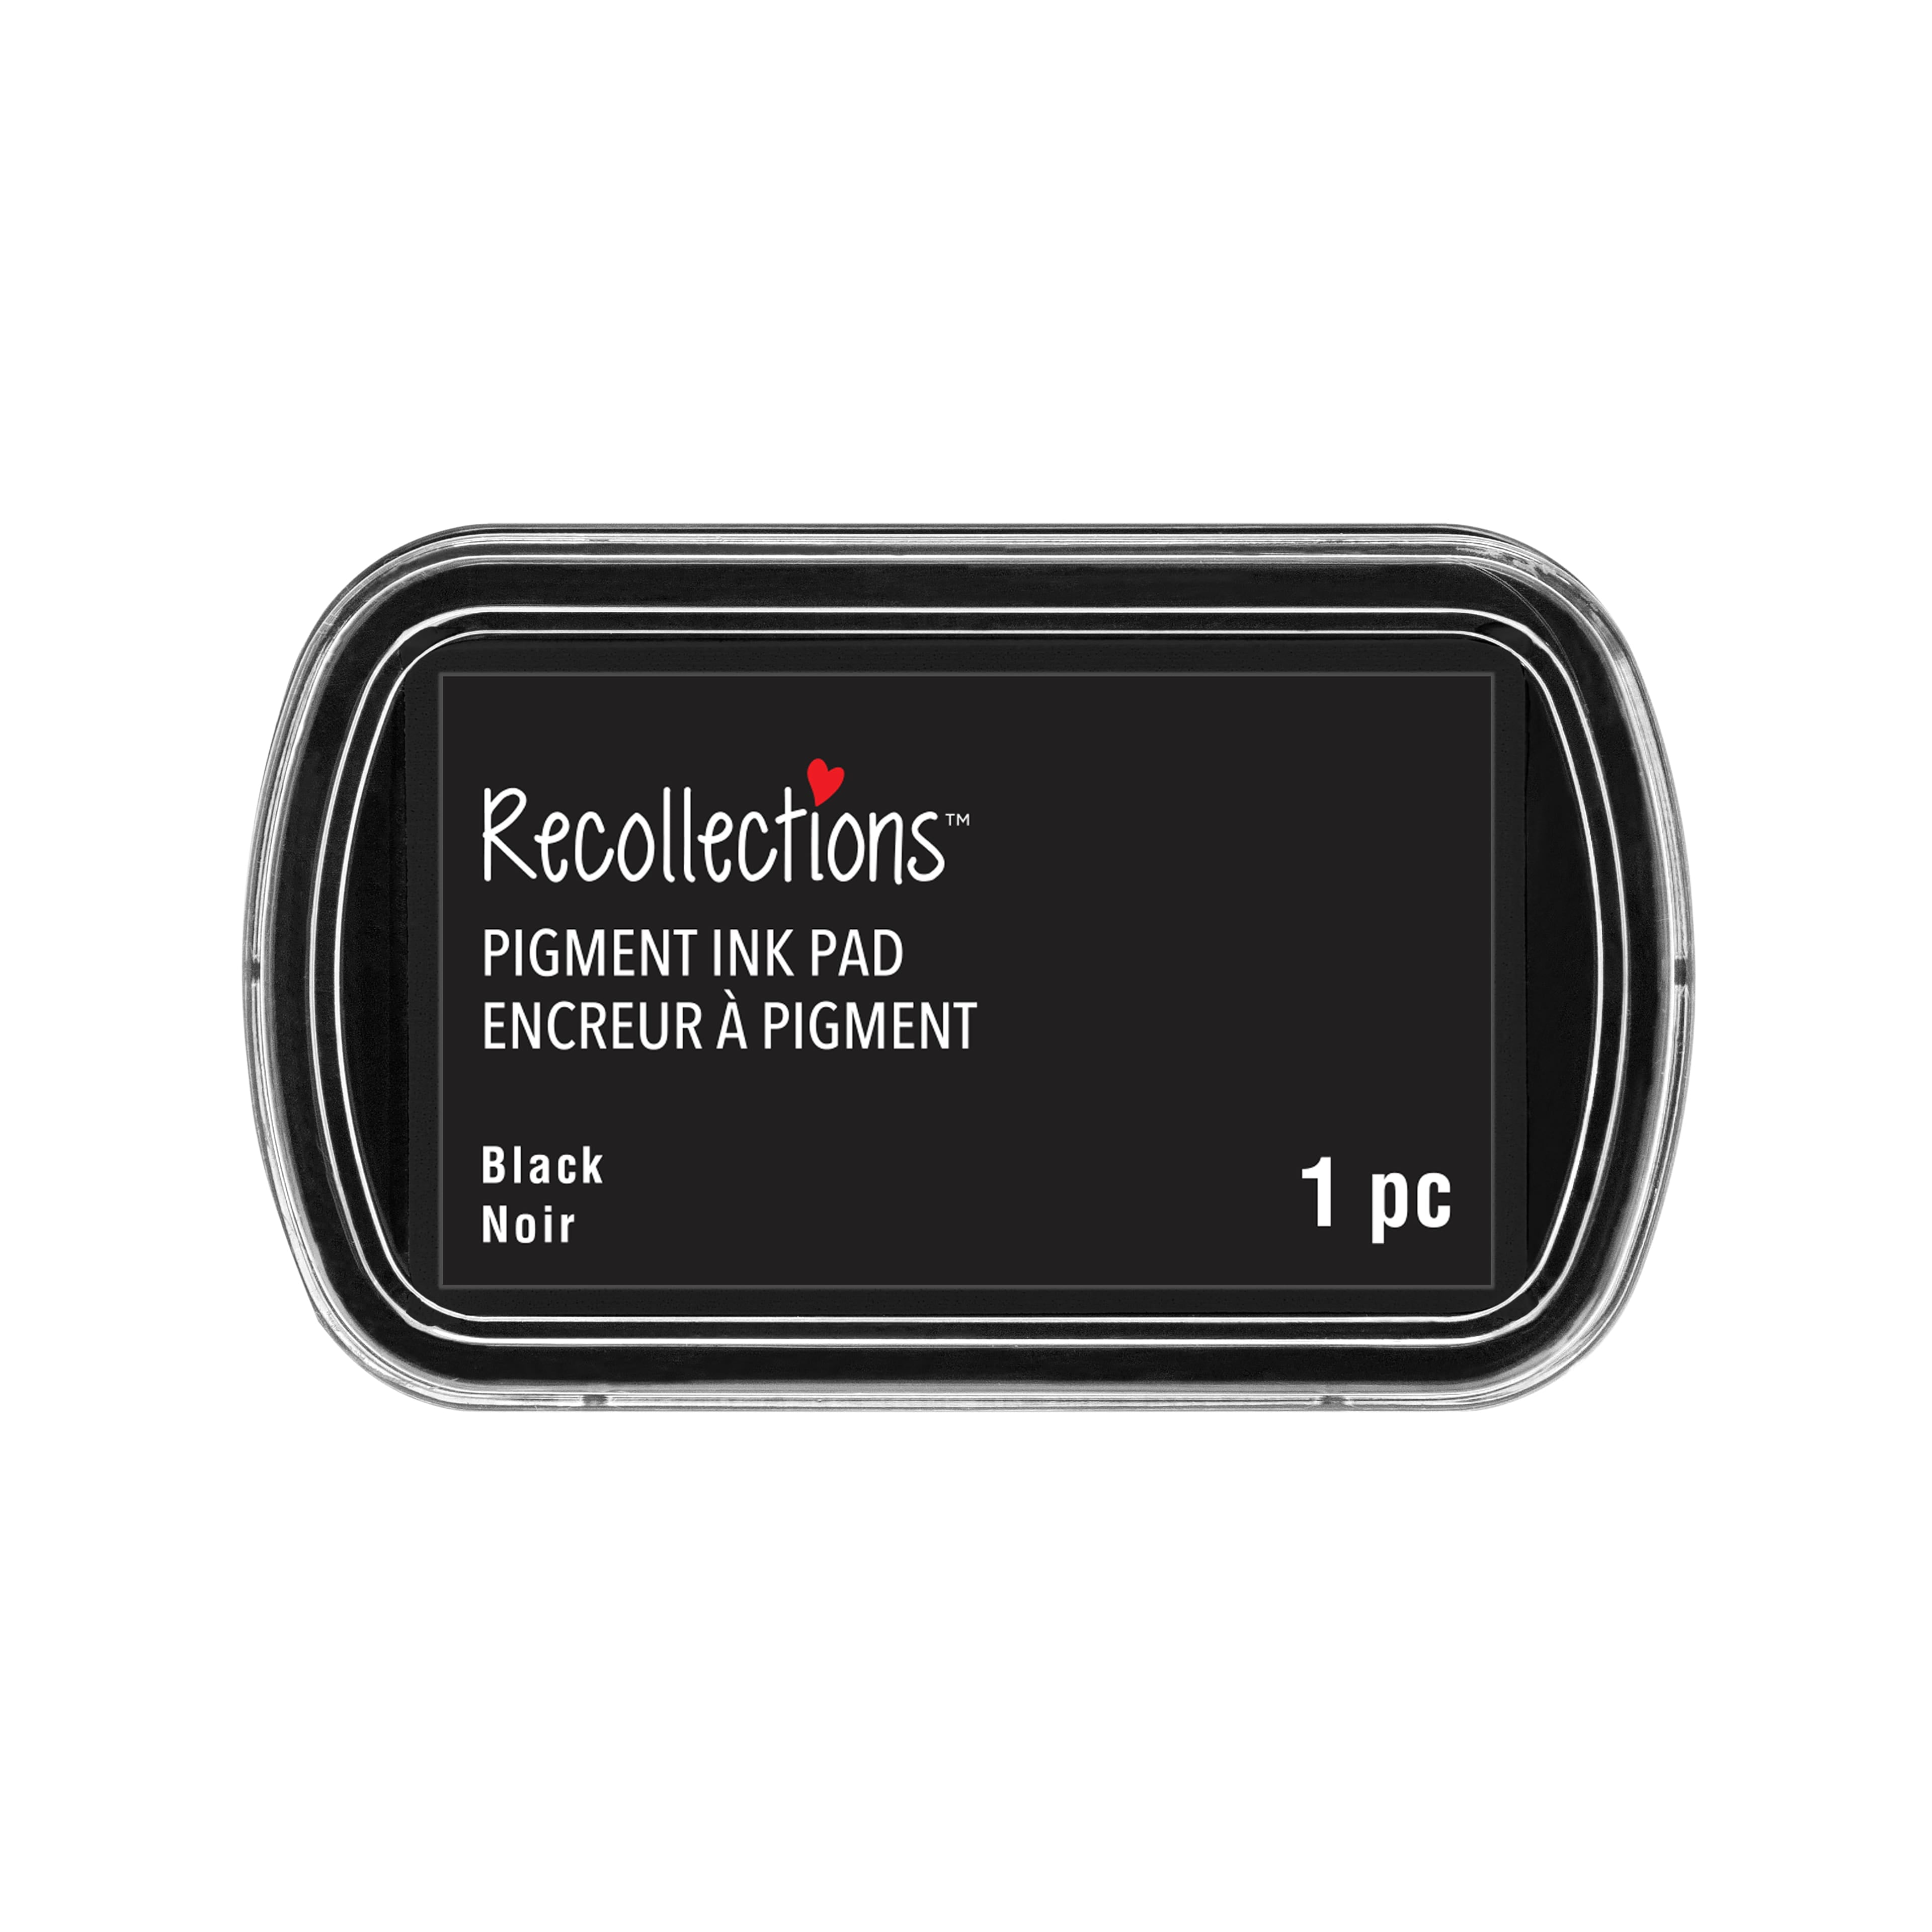 Archival Pigment Ink Pad by Recollections™, Michaels